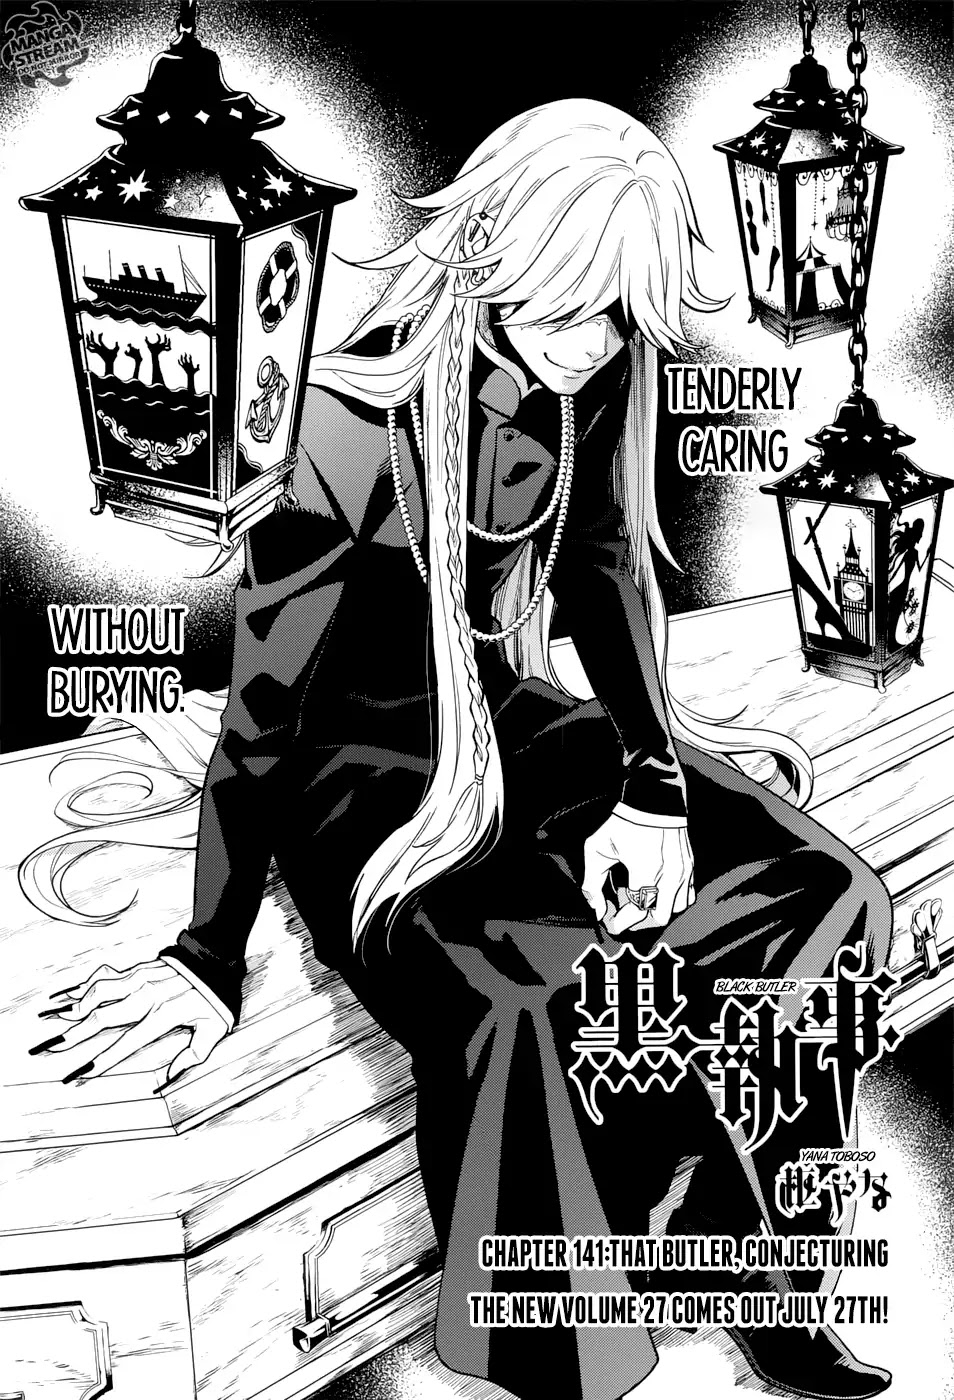 Kuroshitsuji Chapter 141: That Butler, Conjecturing - Picture 1